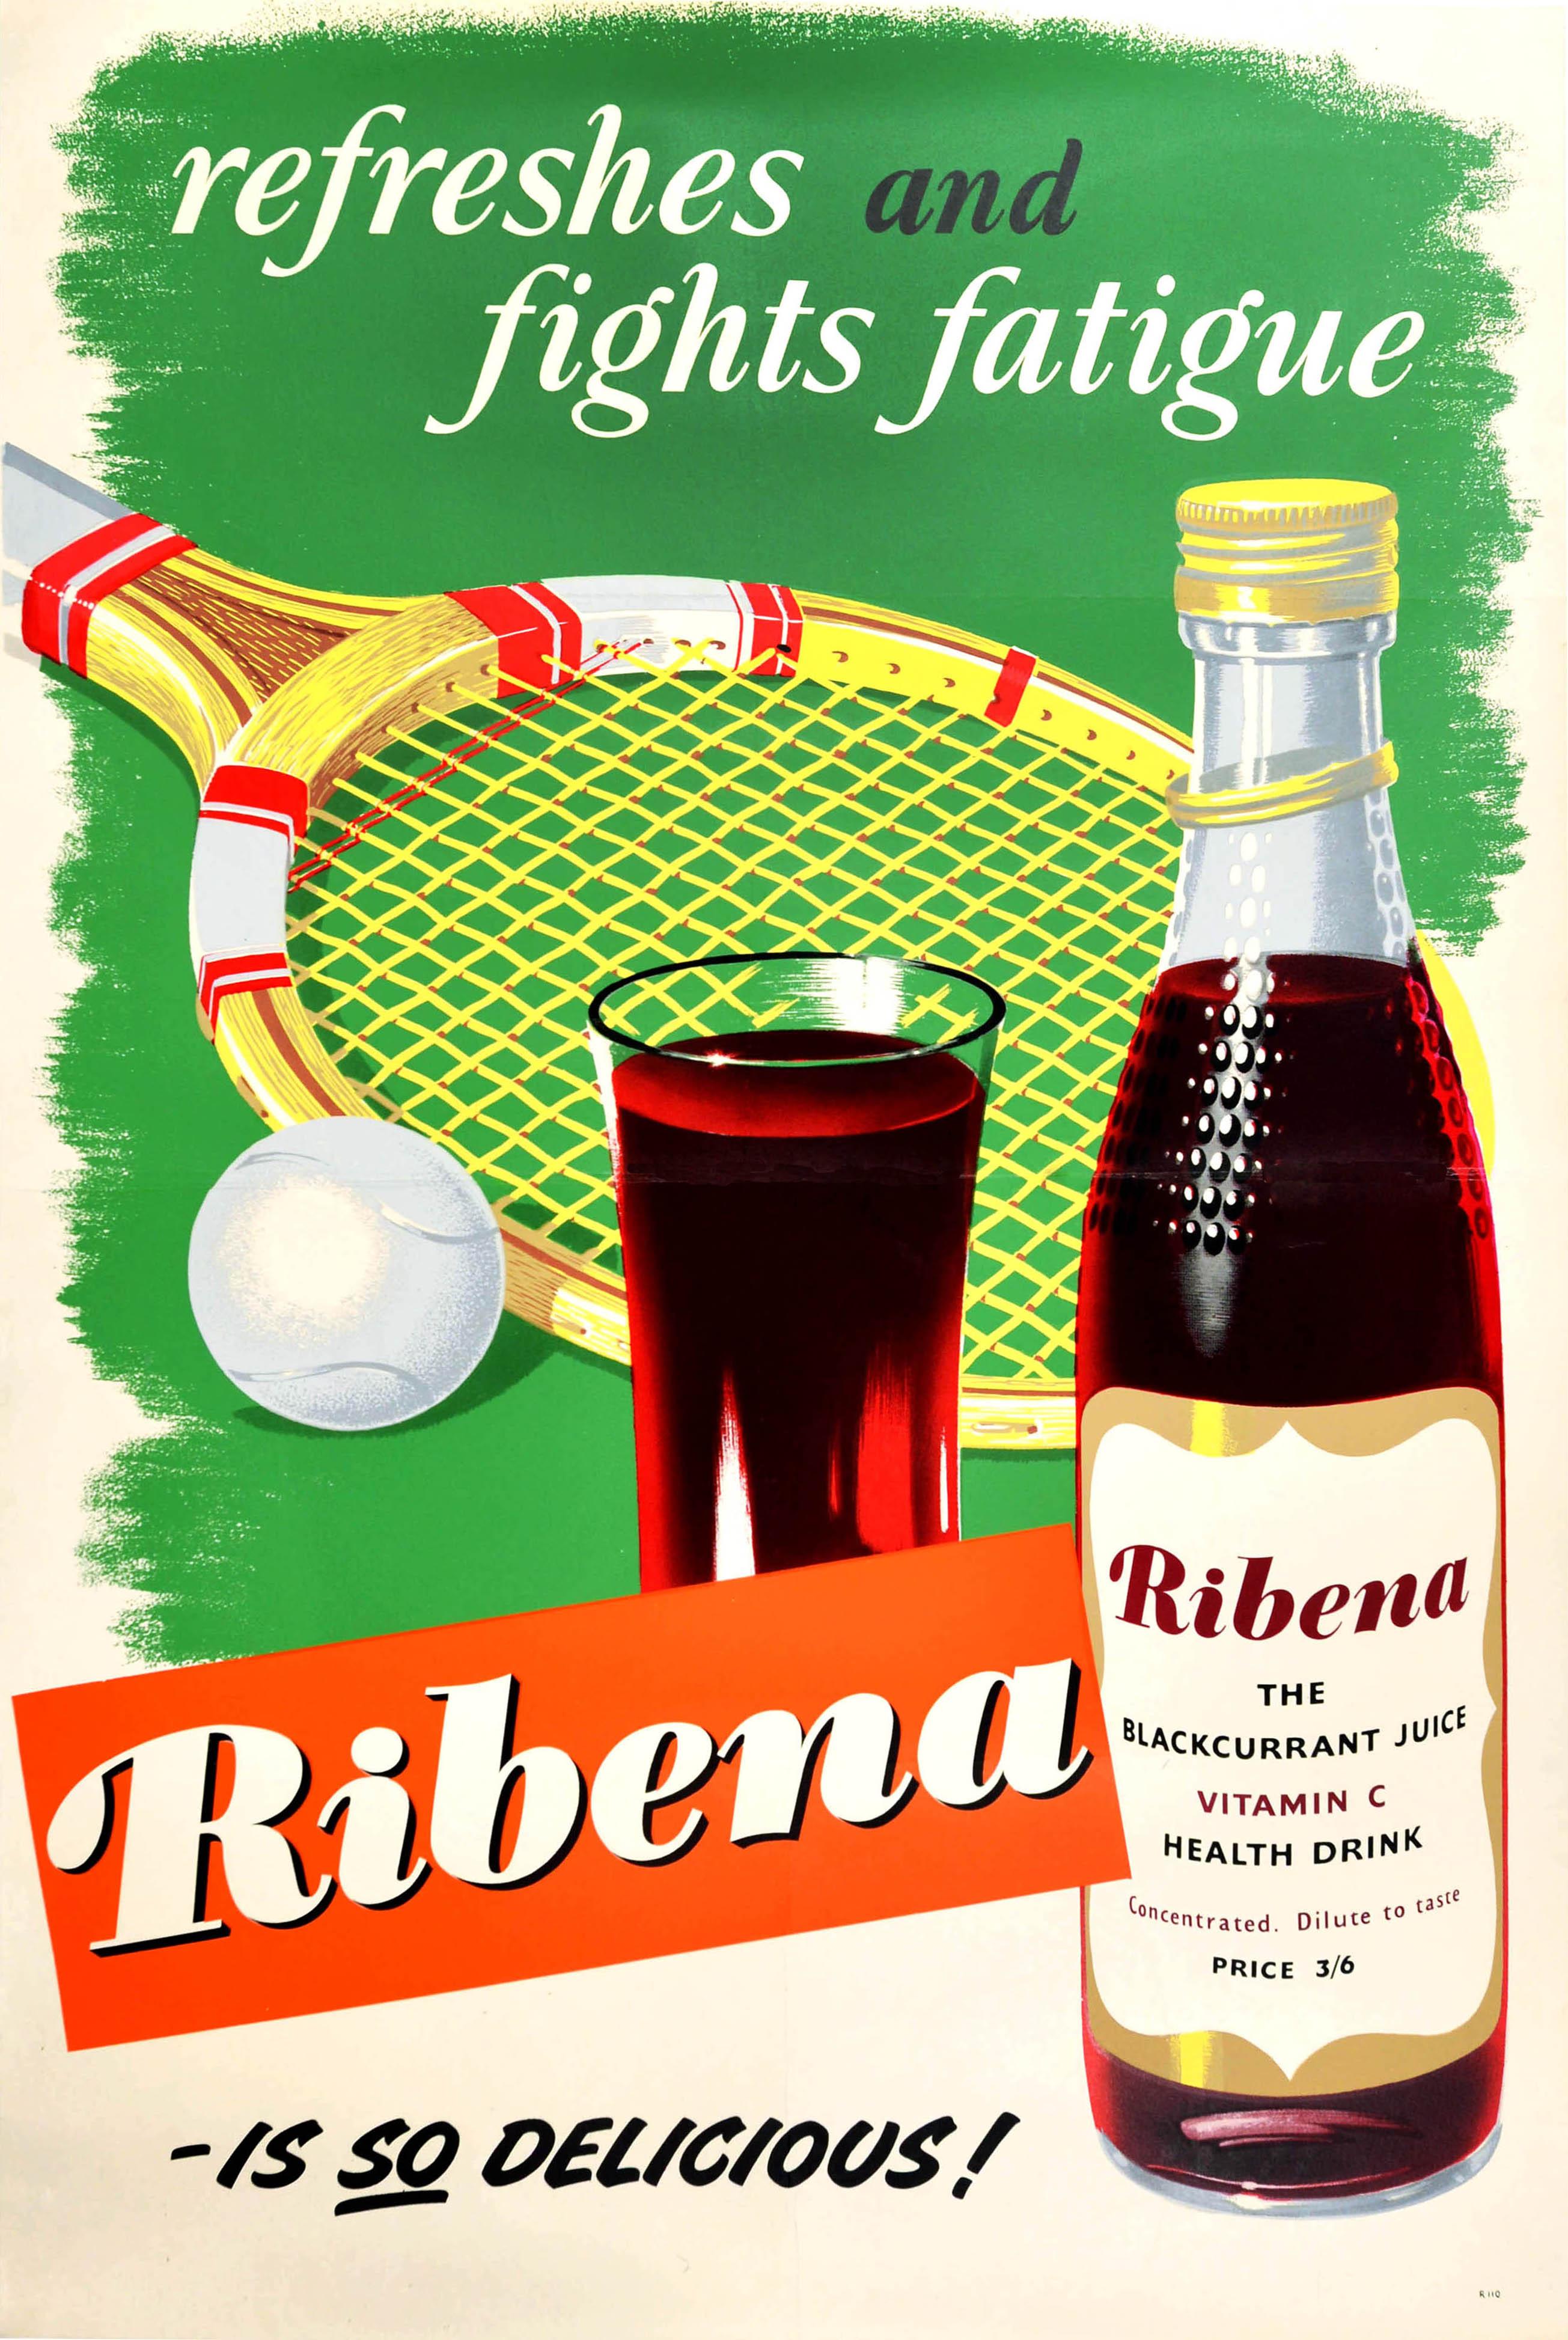 Unknown Print - Original Vintage Drink Poster For Ribena Refreshes Fights Fatigue Summer Tennis